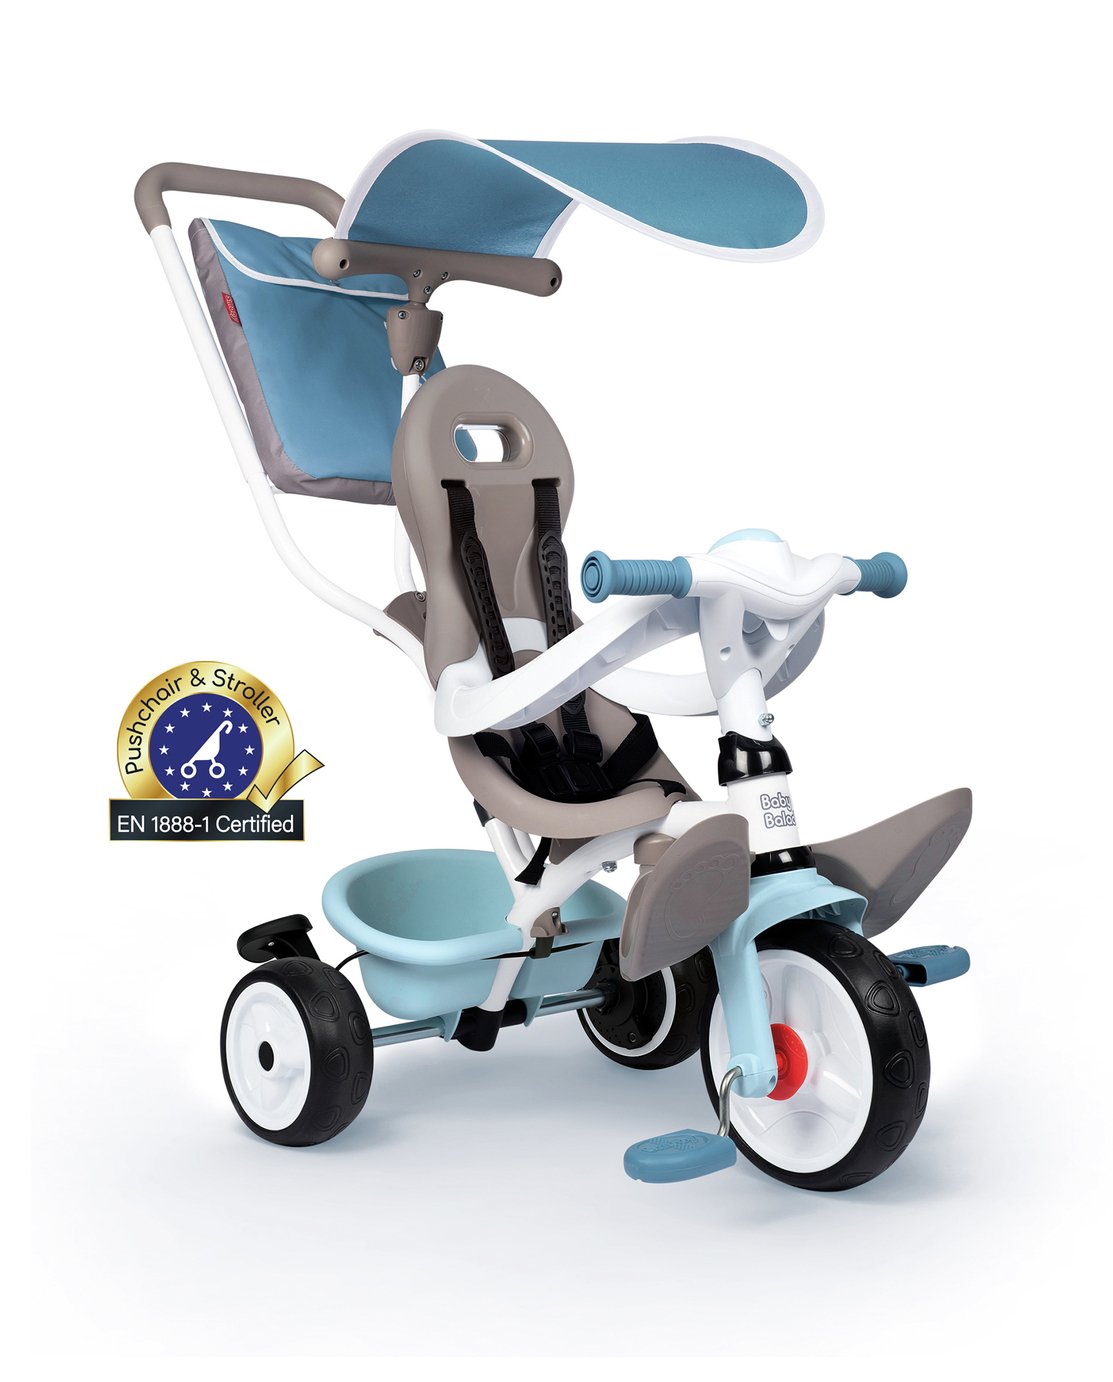 Smoby Baby Balade 3-in-1 Trike Ride On - Blue